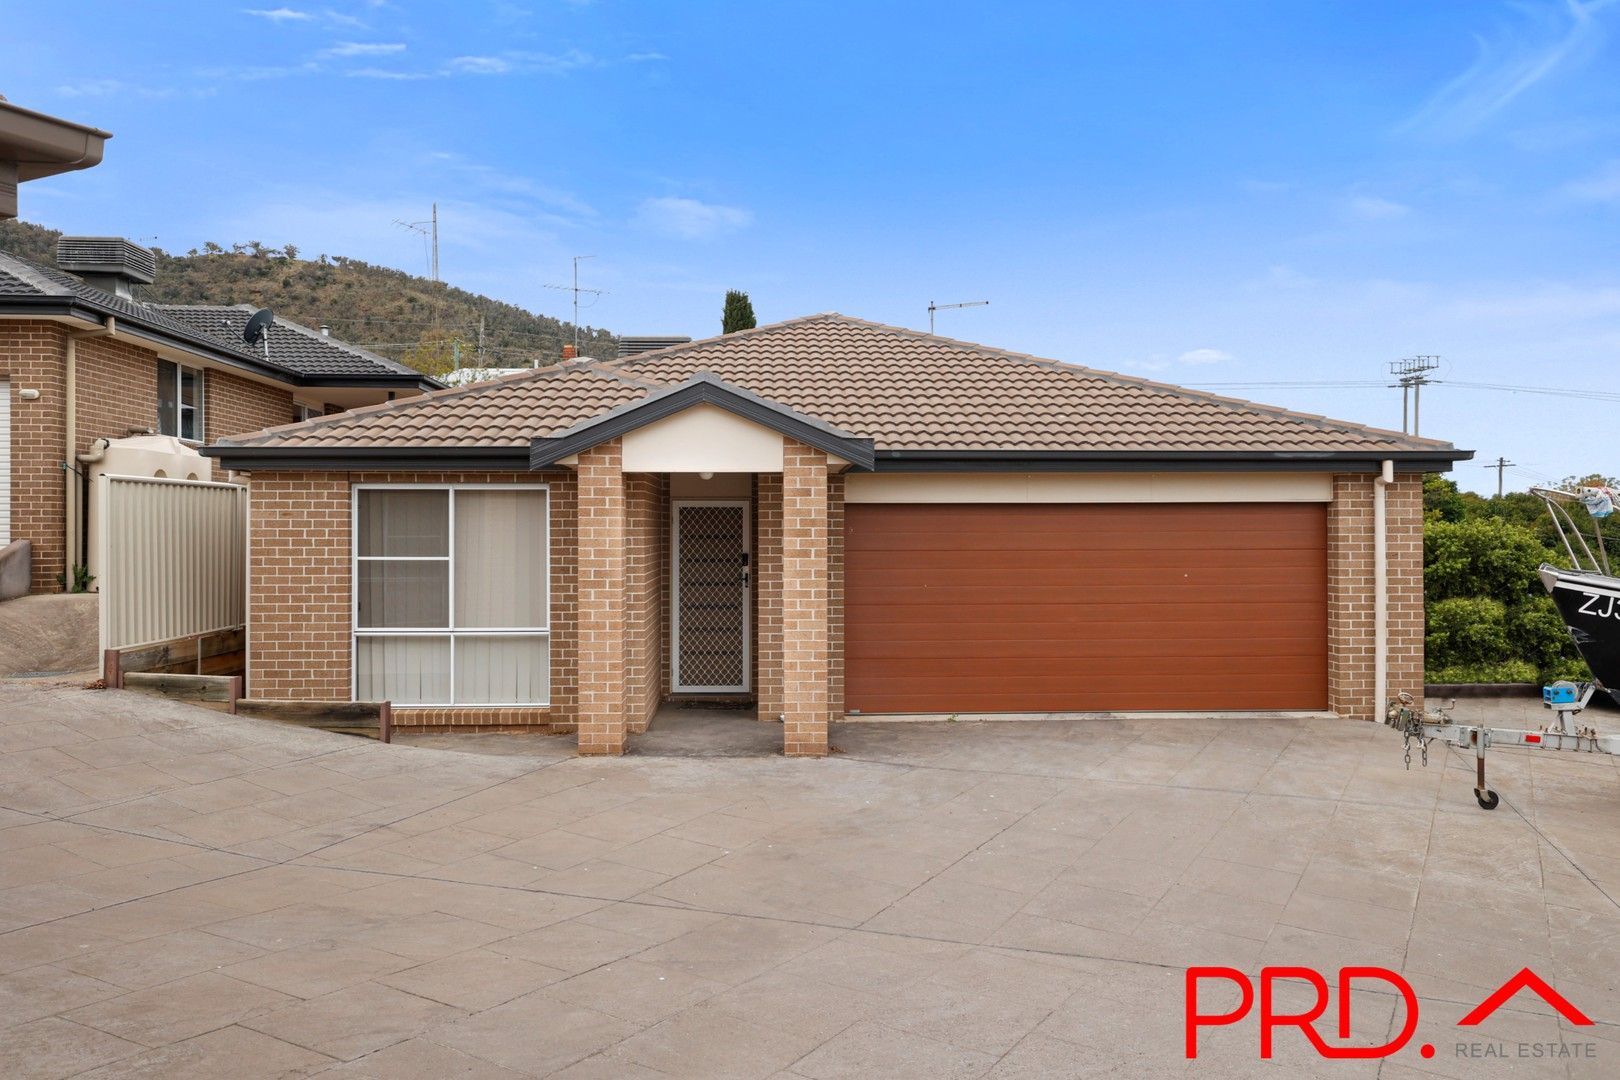 3 bedrooms House in 5 Porter Street TAMWORTH NSW, 2340